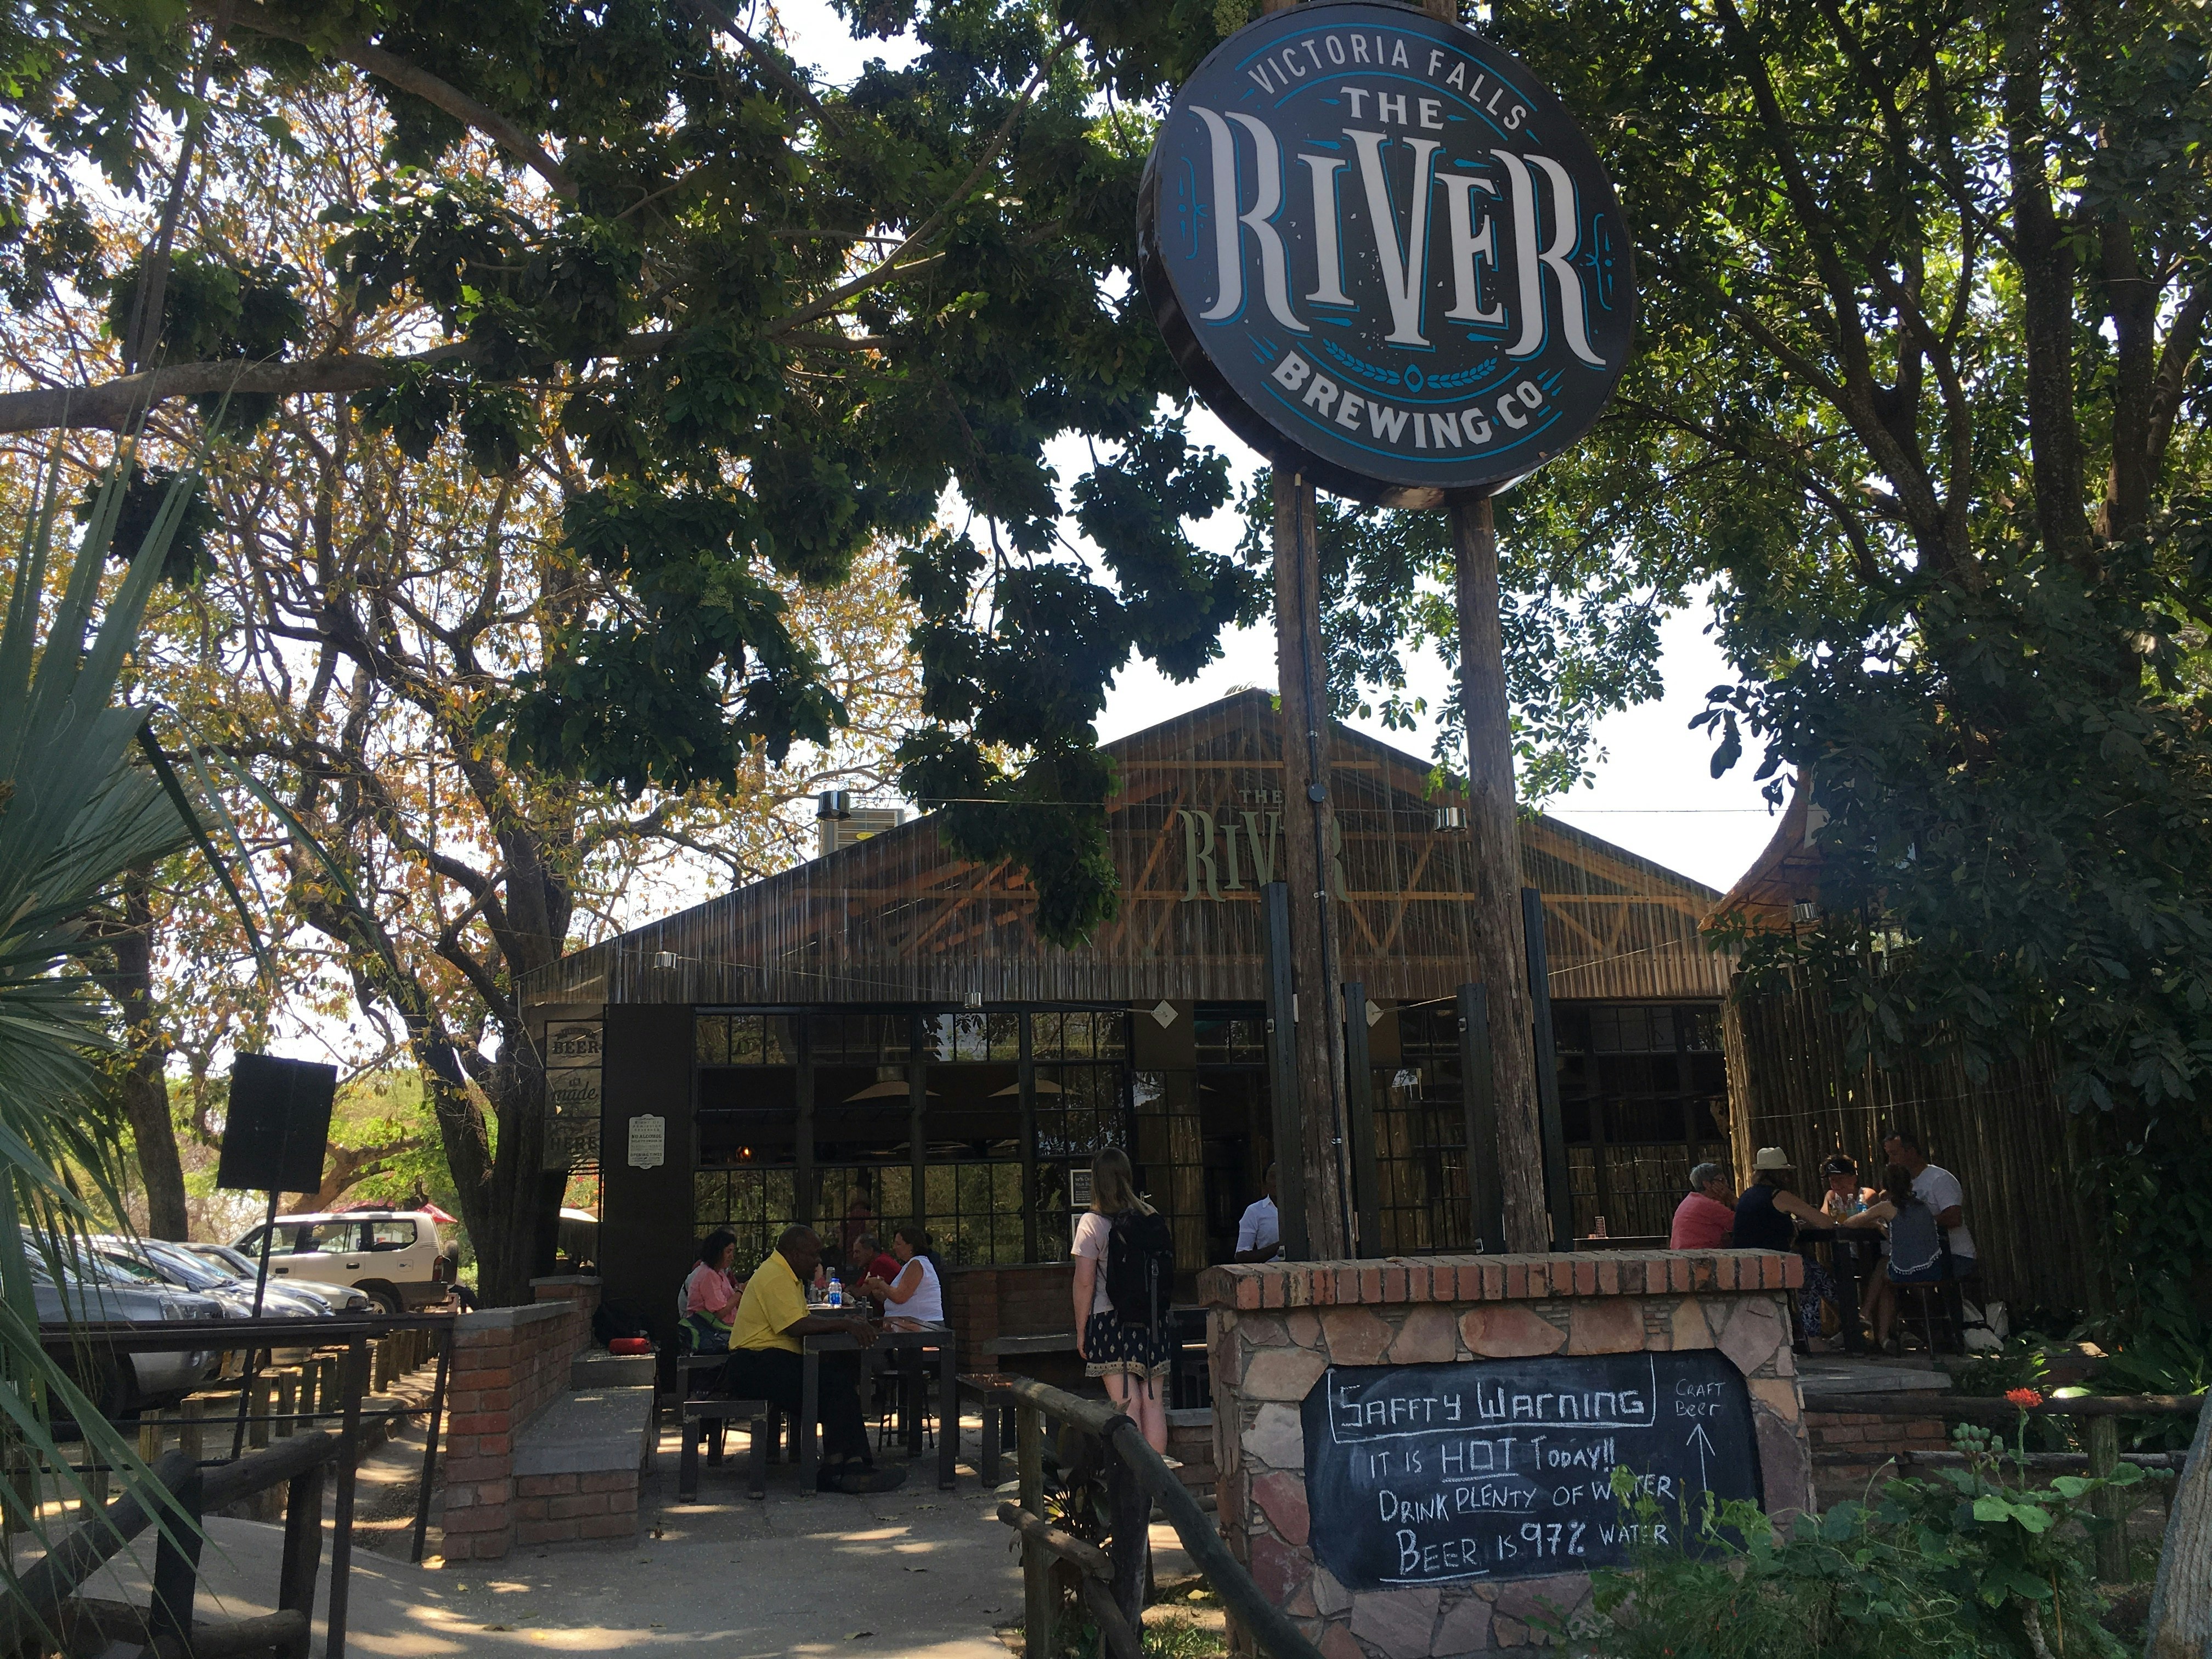 Beneath a tree canopy sits a wooden A-frame building that is the home of The River Brewing Co; people sit around tables sitting in front of the building.